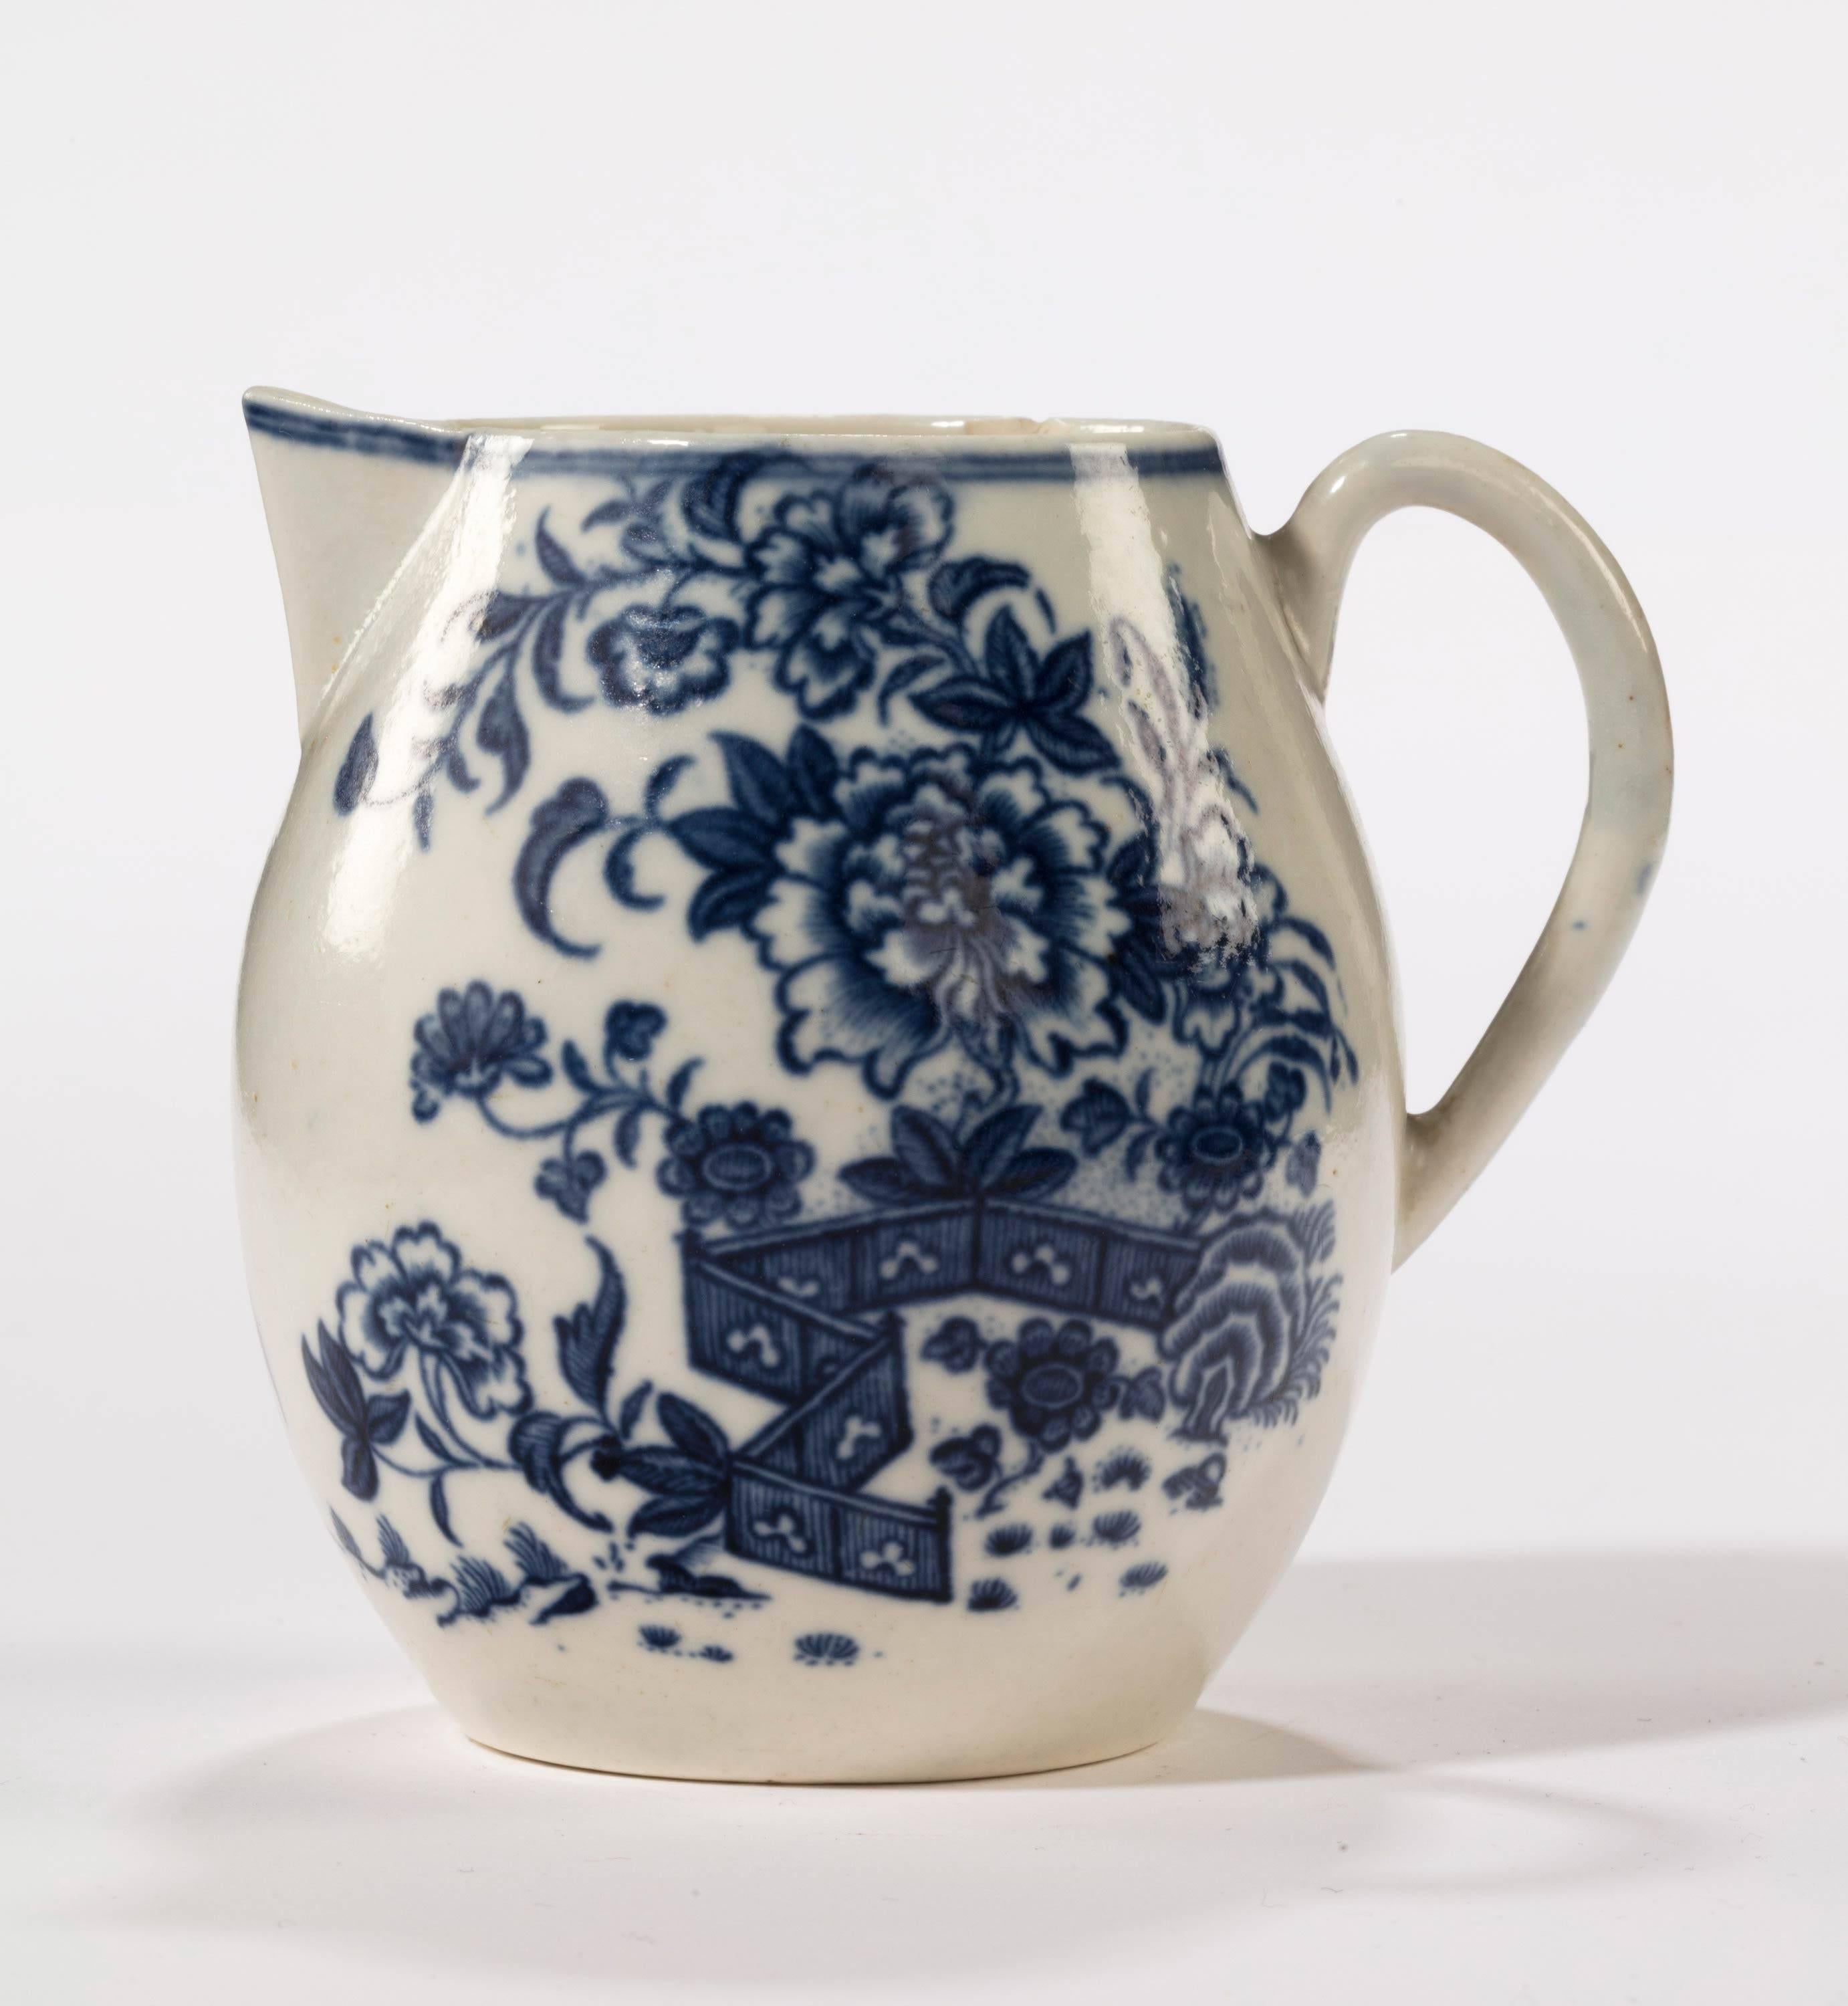 18th Century Liverpool Blue and White Printed Jug In Excellent Condition For Sale In Peterborough, Northamptonshire